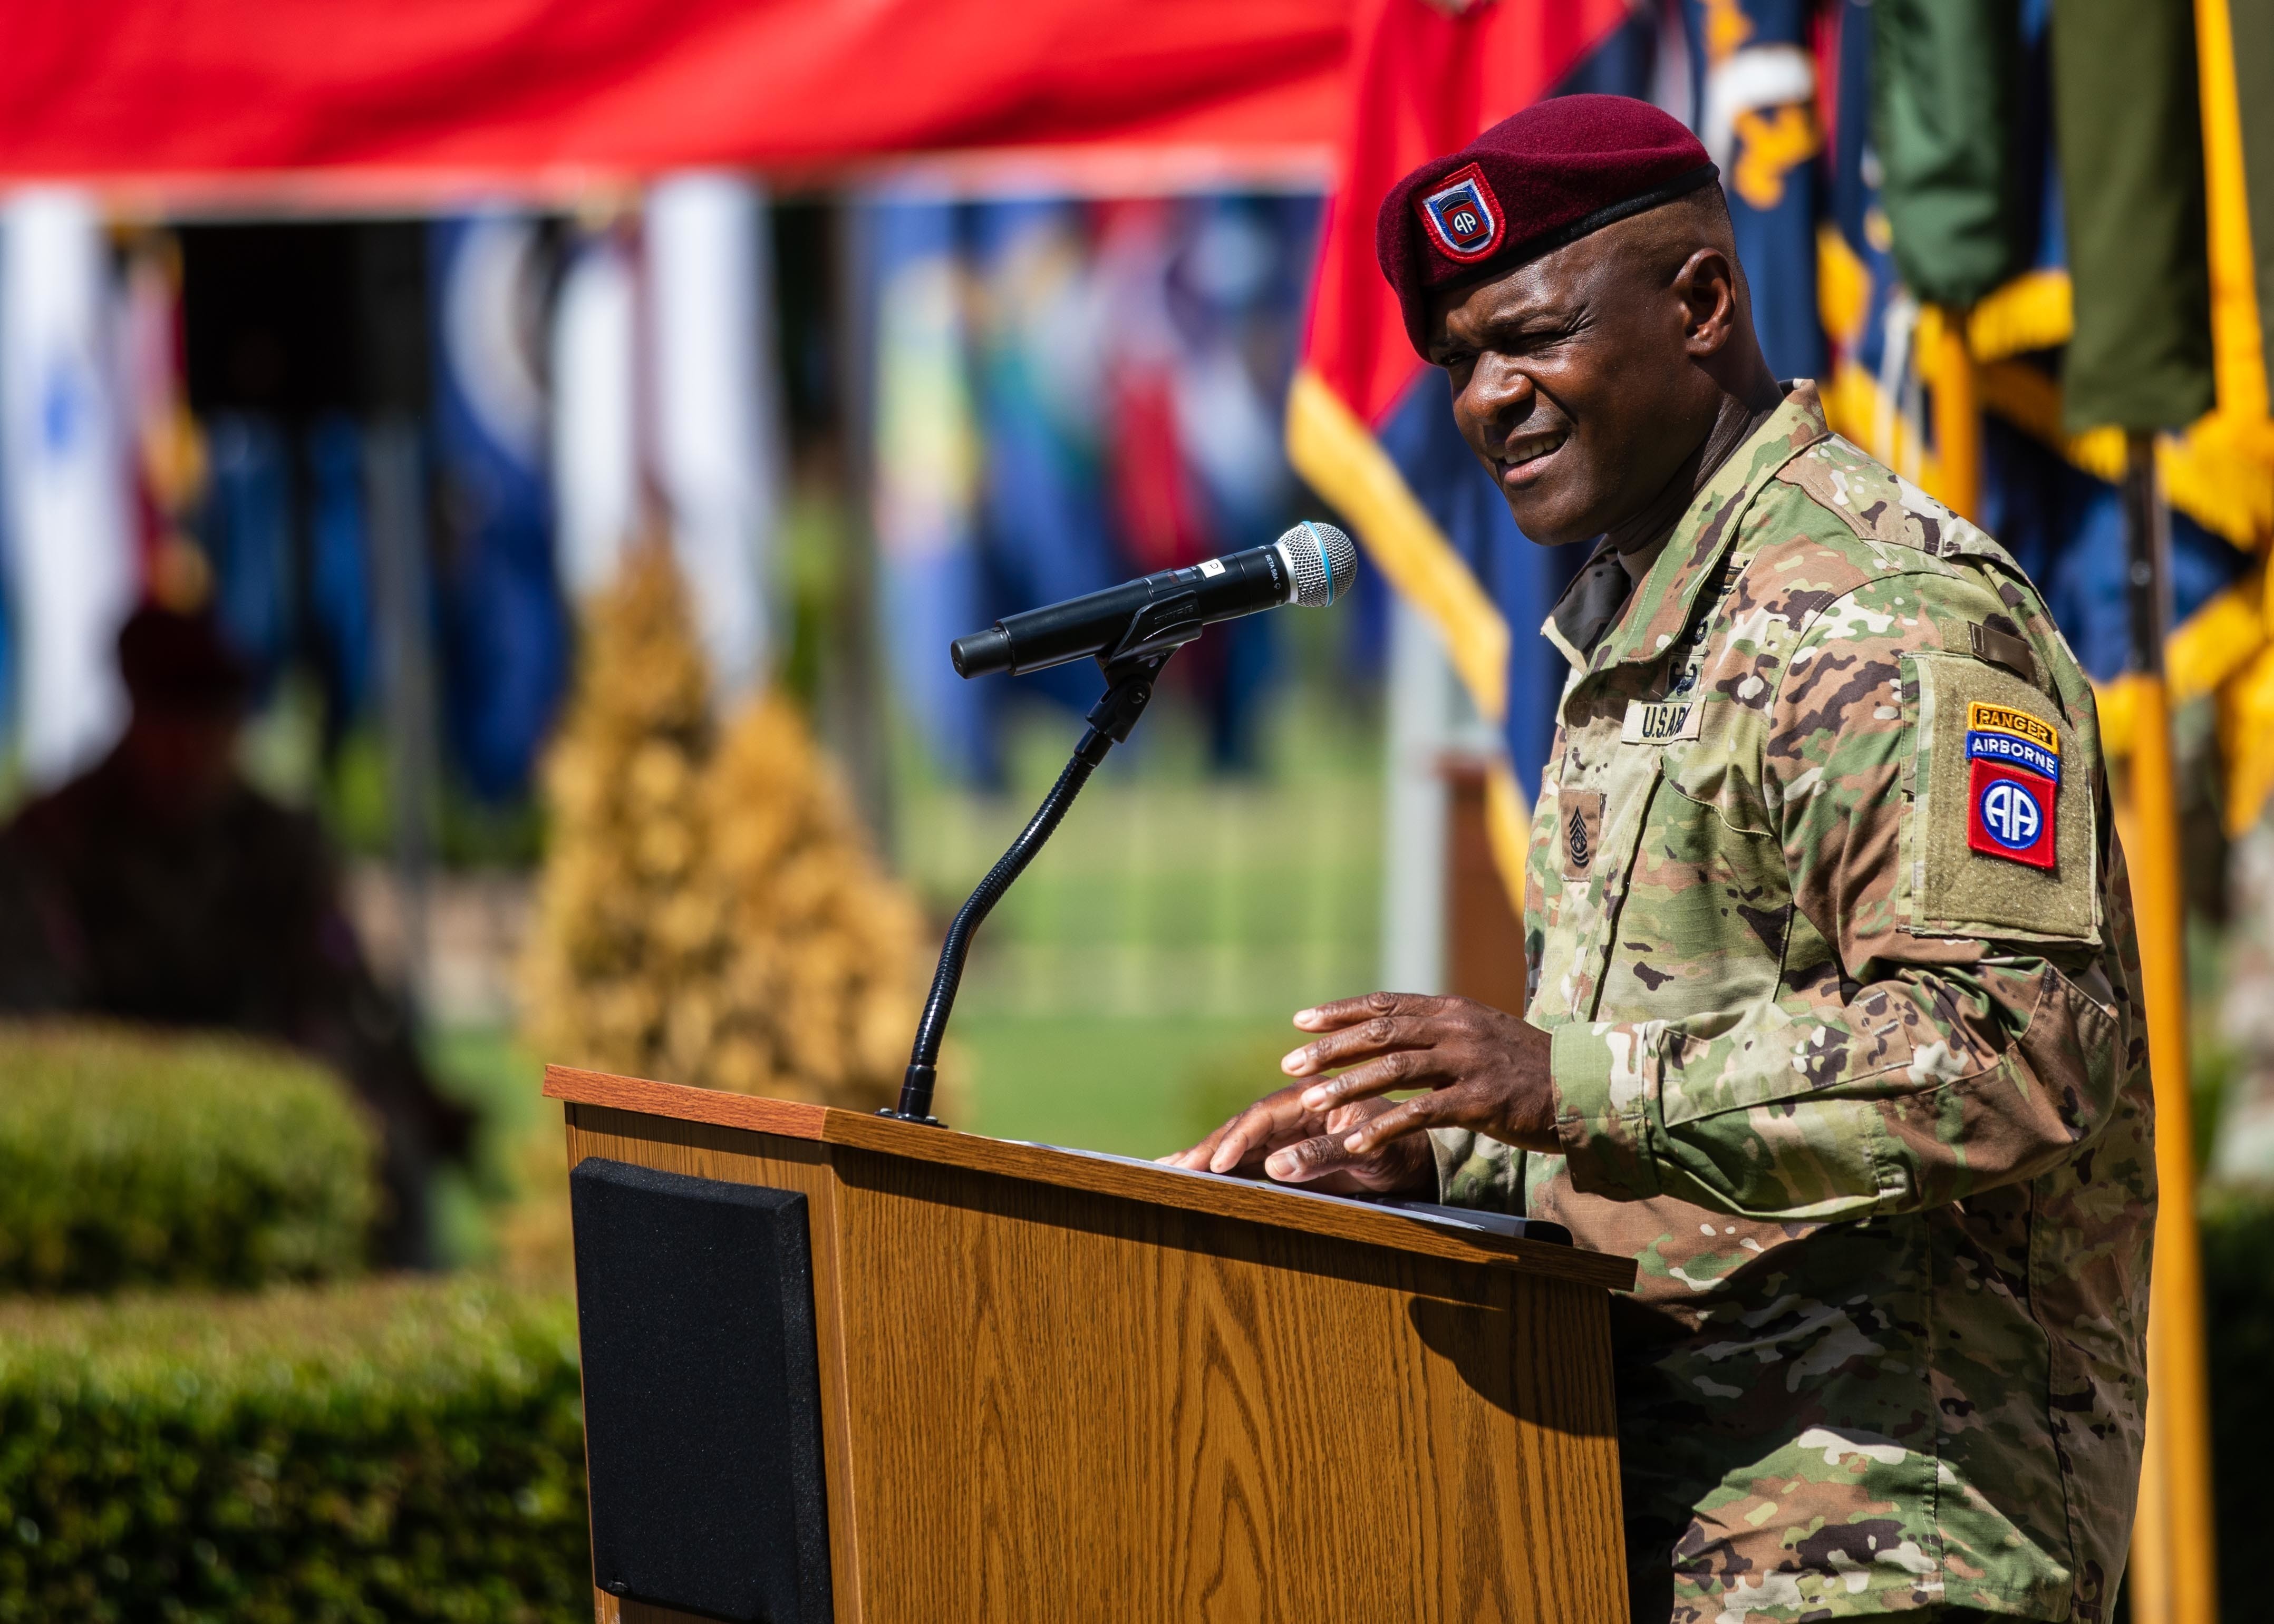 82nd Airborne Division New Leaders in Fort Bragg Ceremony